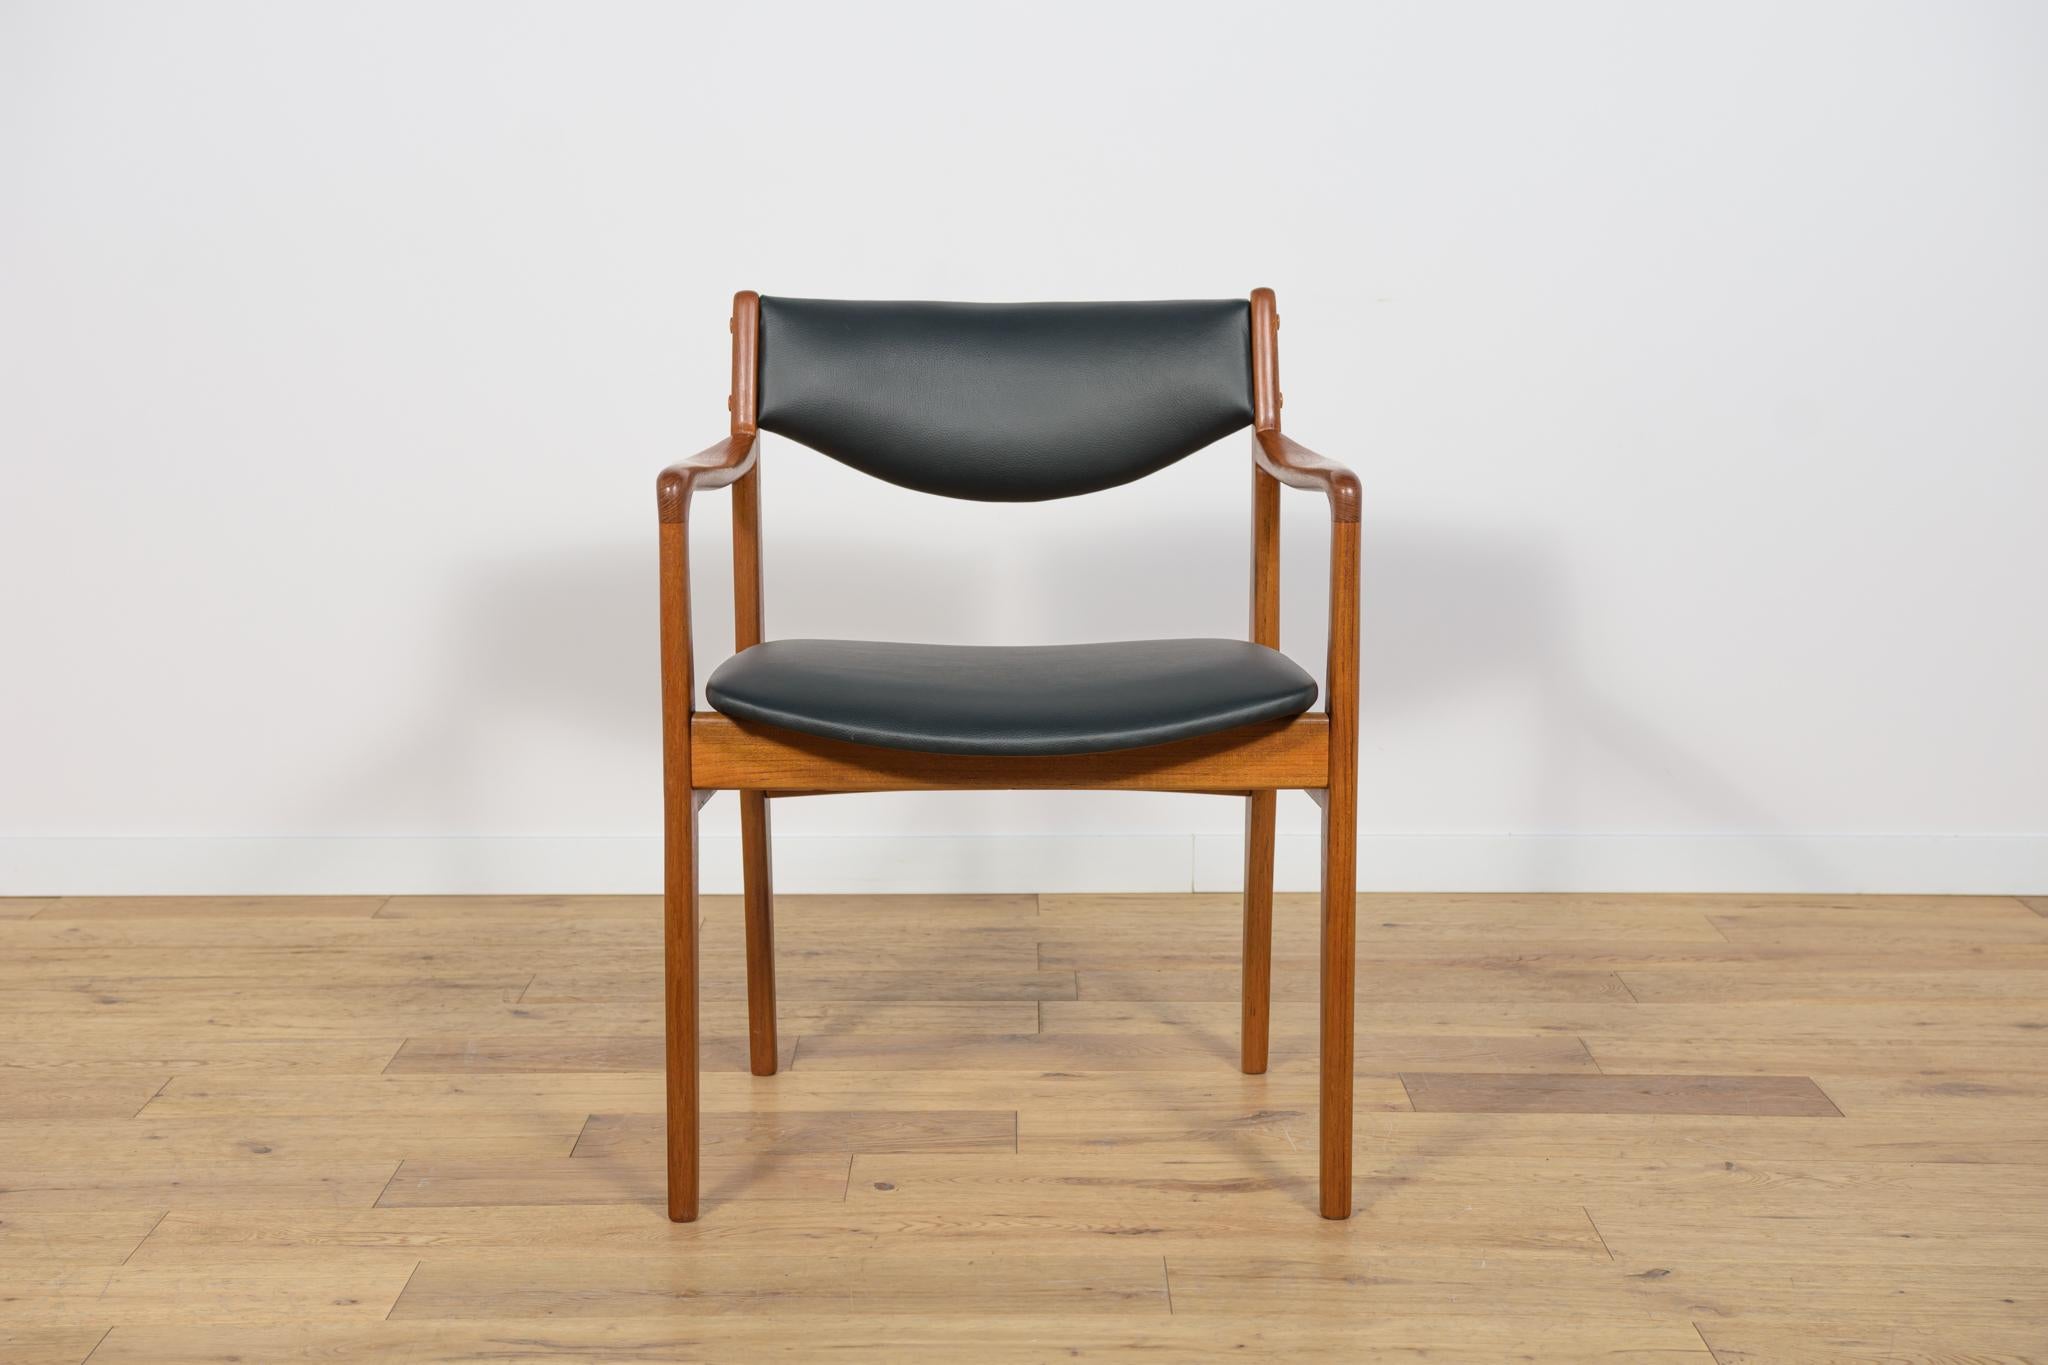 The armchair made of teak wood in Denmark in the 1960s. An armchair with an interesting form, characterized by profiled armrests. The piece of furniture has undergone comprehensive carpentry and upholstery renovation. Wooden elements cleaned of old